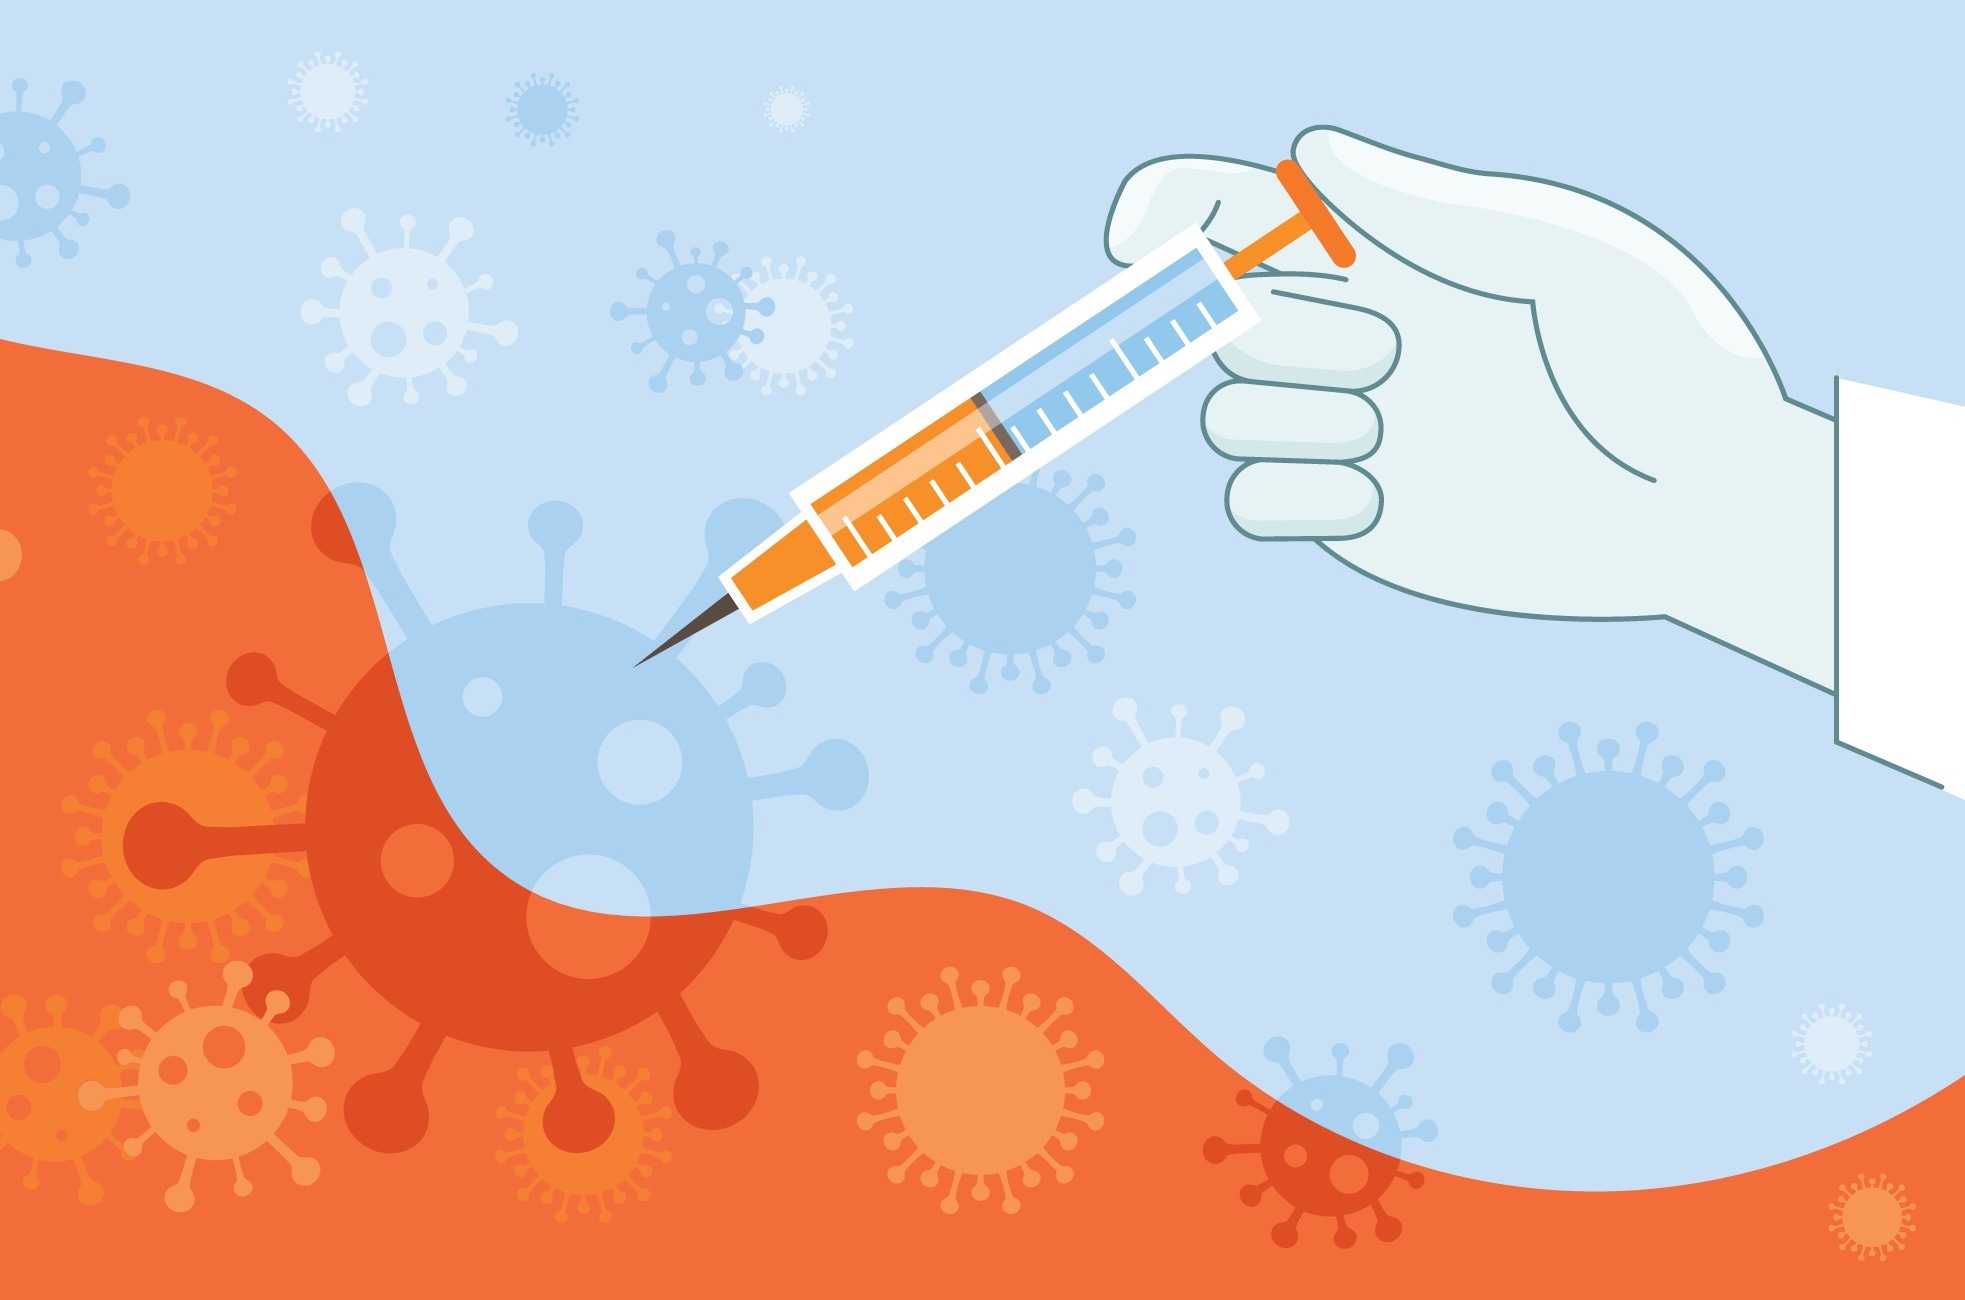 Study: Vaccination after developing long COVID: impact on clinical presentation, viral persistence and immune responses. Image Credit: MuchMania / Shutterstock